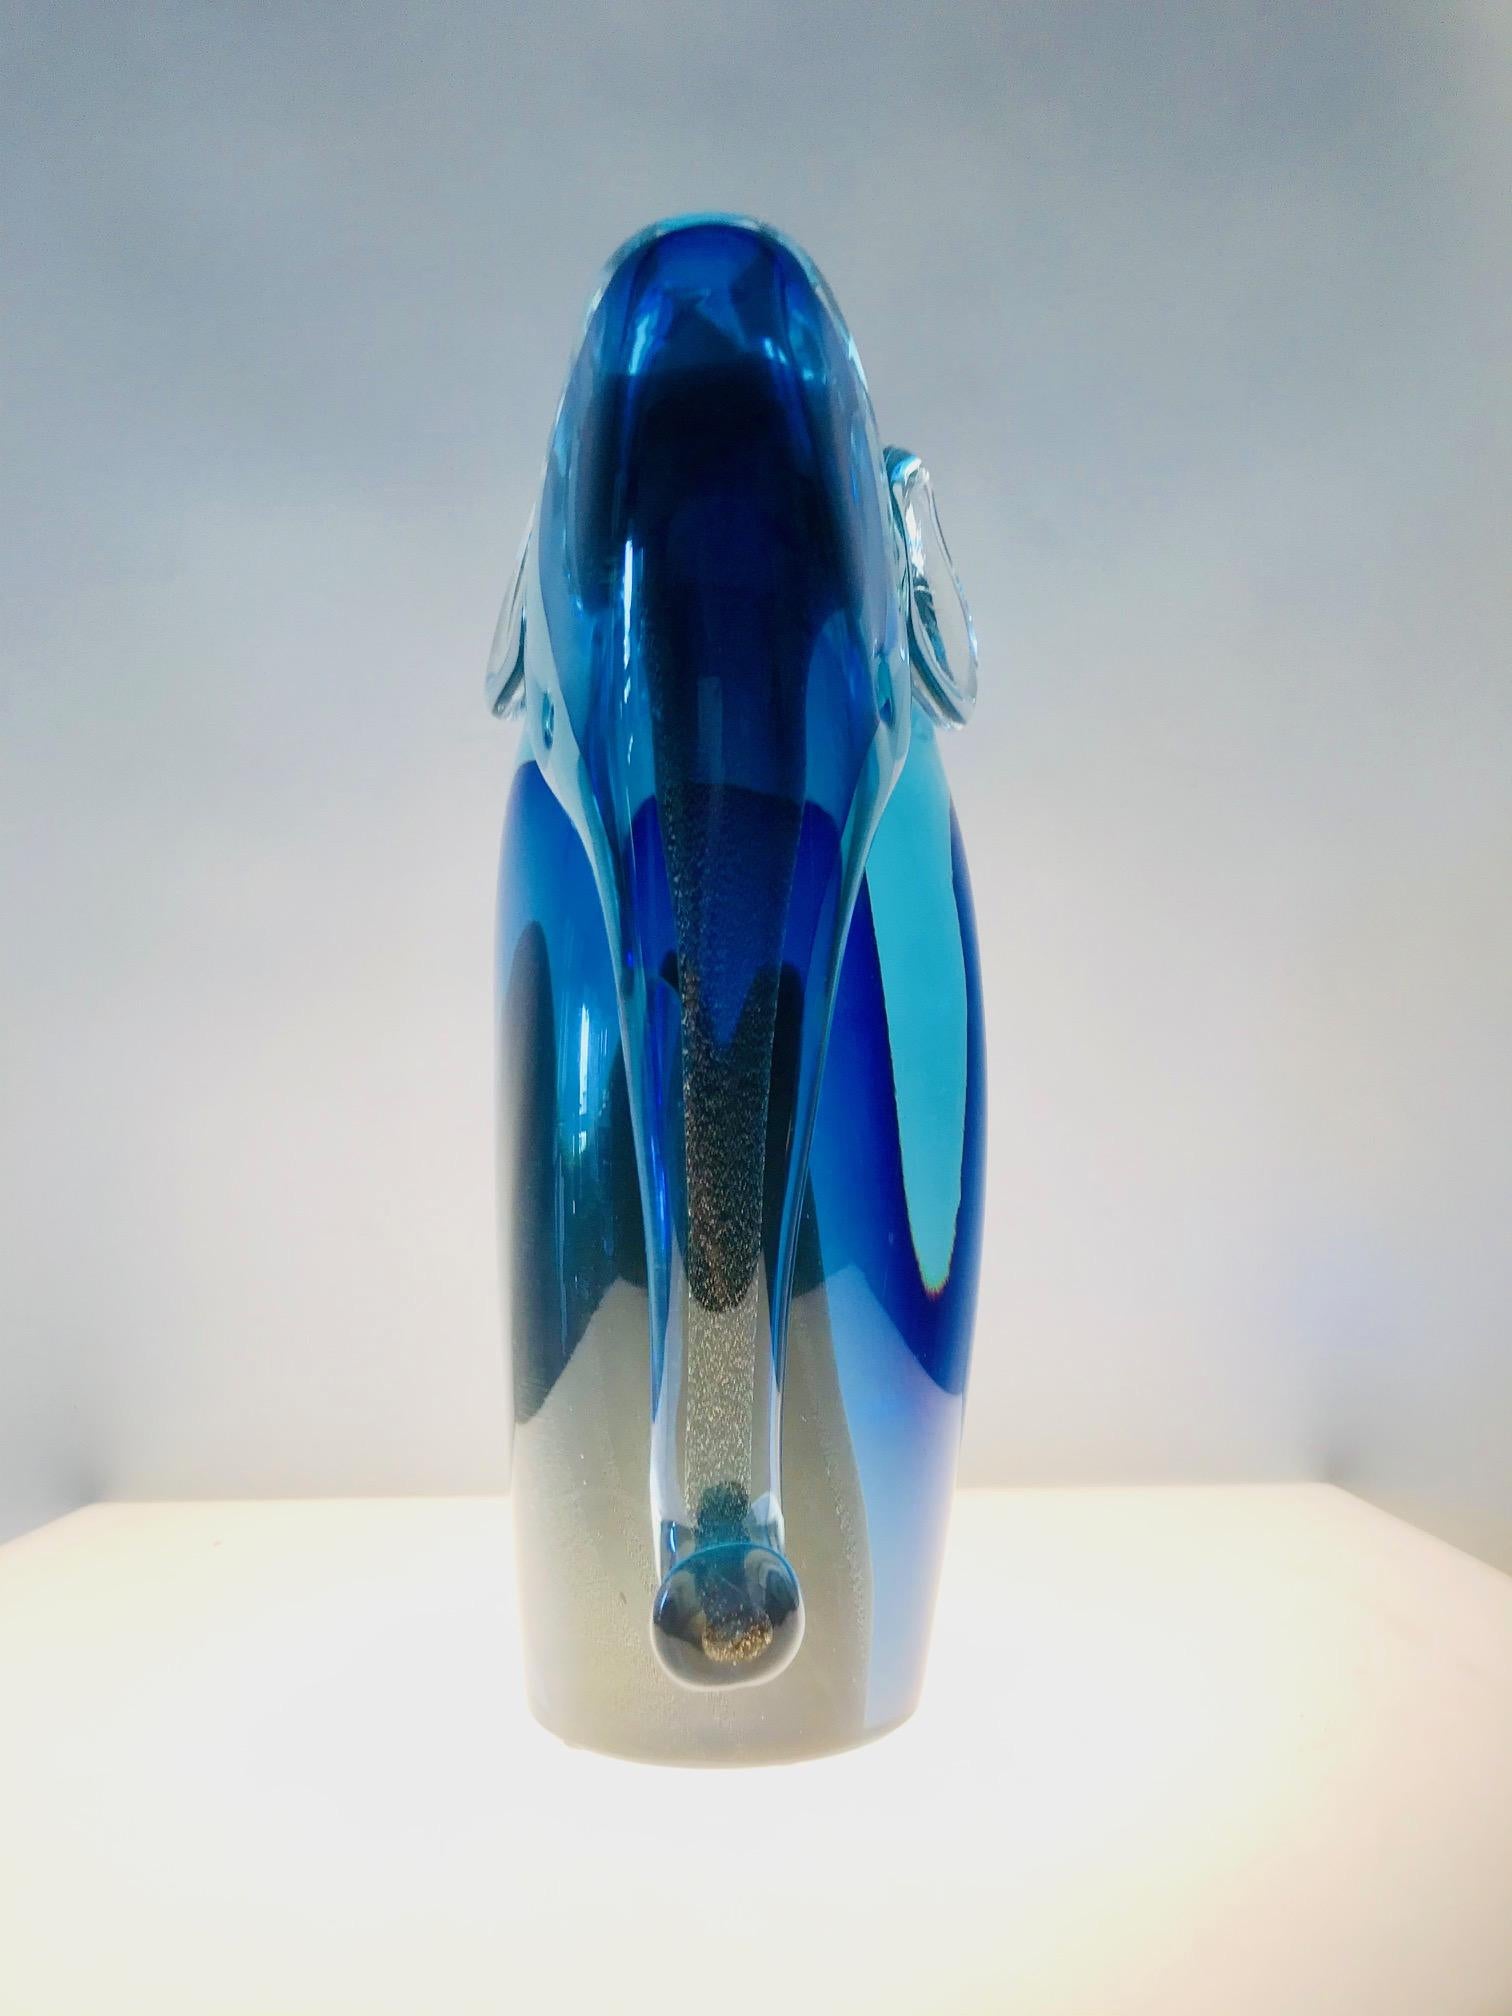 Hand-Crafted Unique Glass Sculpture of a 